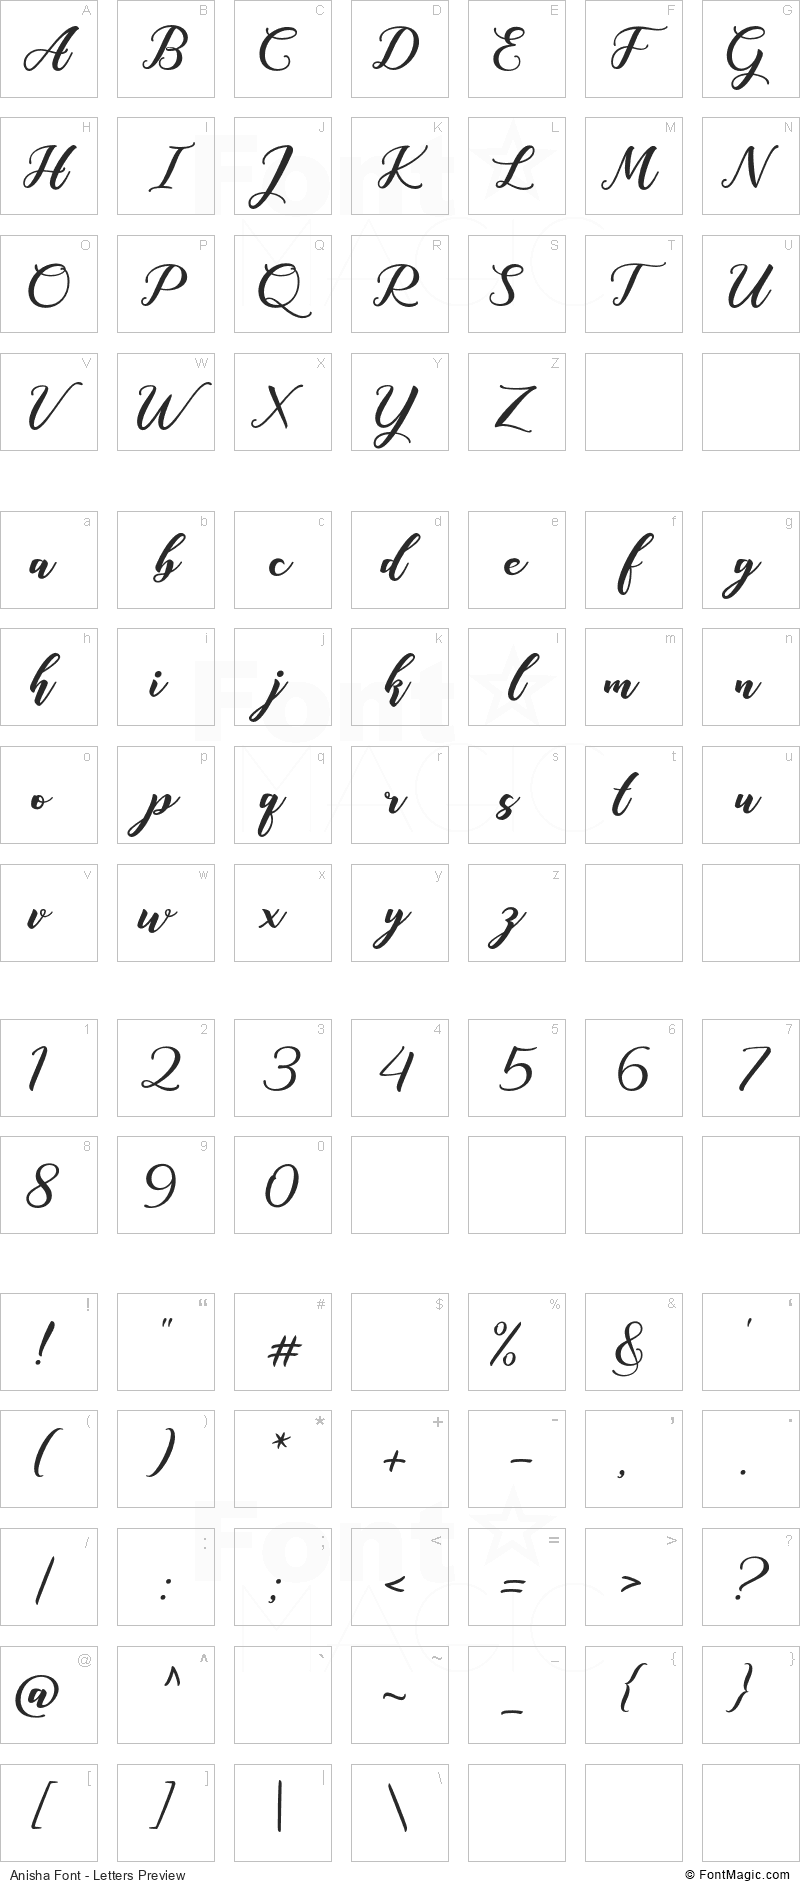 Anisha Font - All Latters Preview Chart